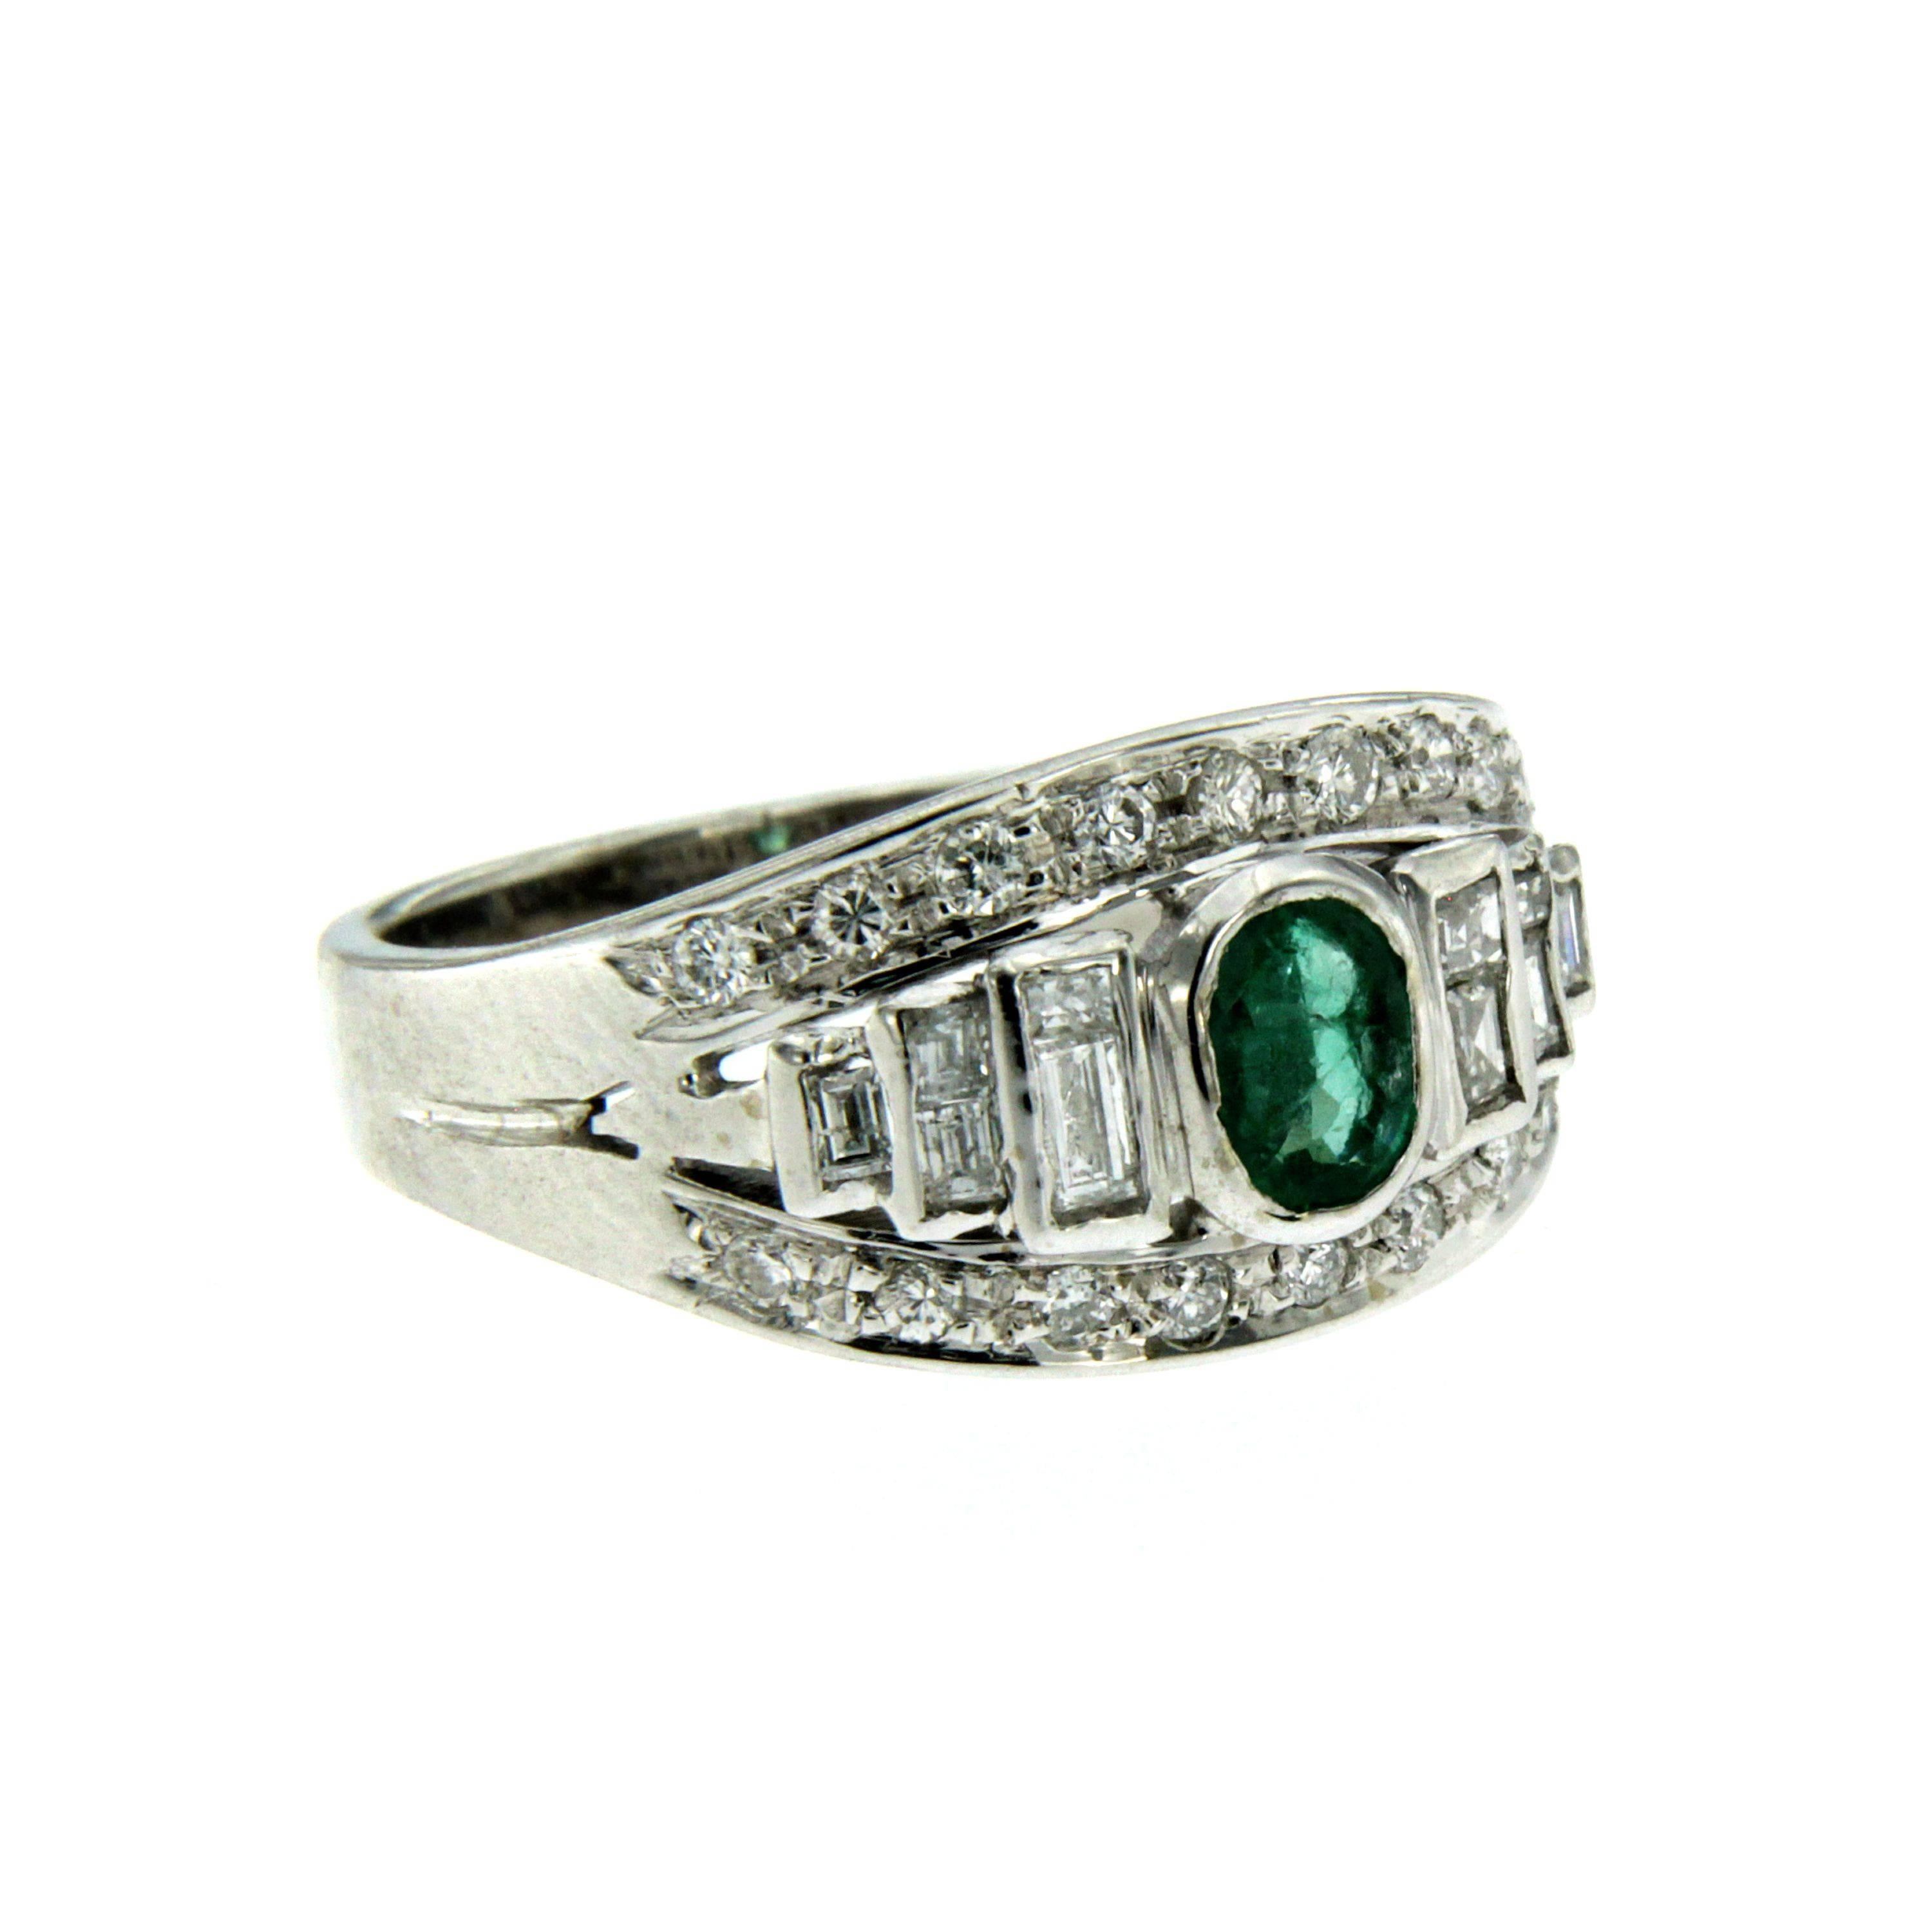 A beautiful emerald ring dated 1980, handmade in 18k white Gold showcasing an Emerald in the center  weighing approx. 0.60 carat and surrounded by 0,60 carat of baguette and round brilliant-cut diamonds graded G-H color Vs clarity.

CONDITION: